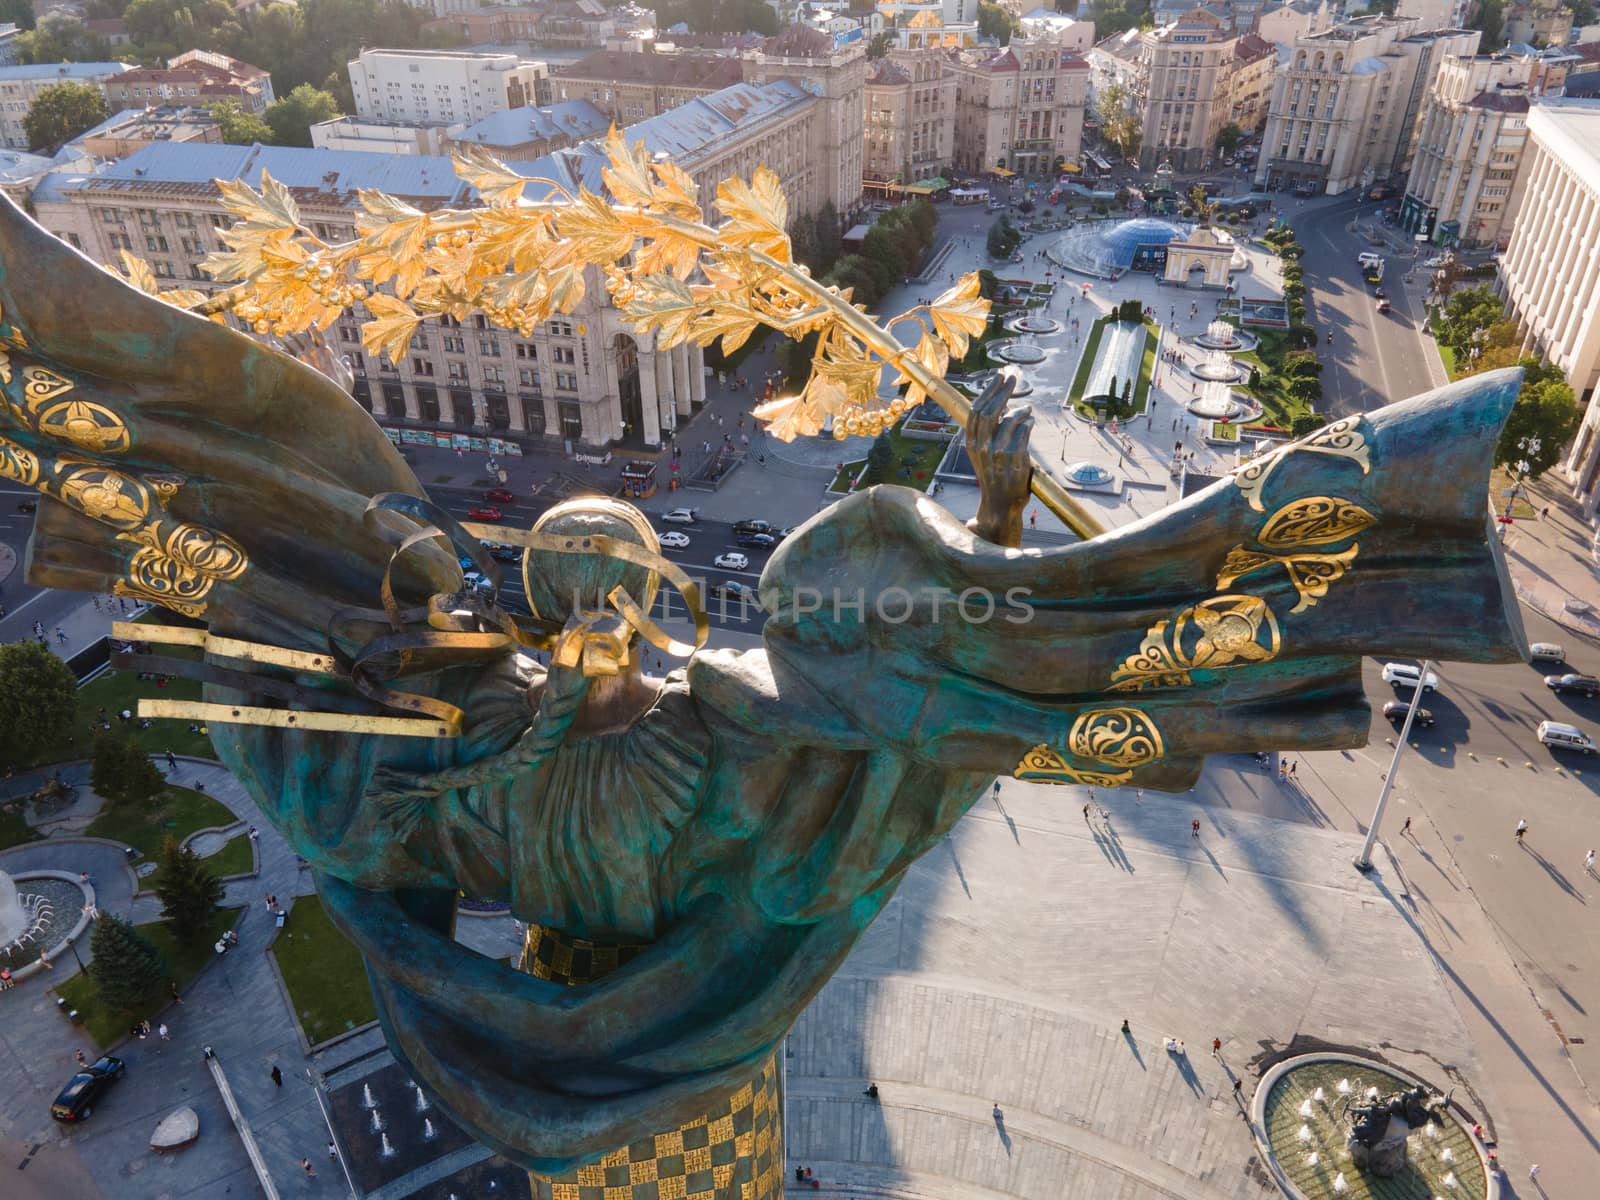 The architecture of Kyiv. Ukraine: Independence Square, Maidan Aerial view